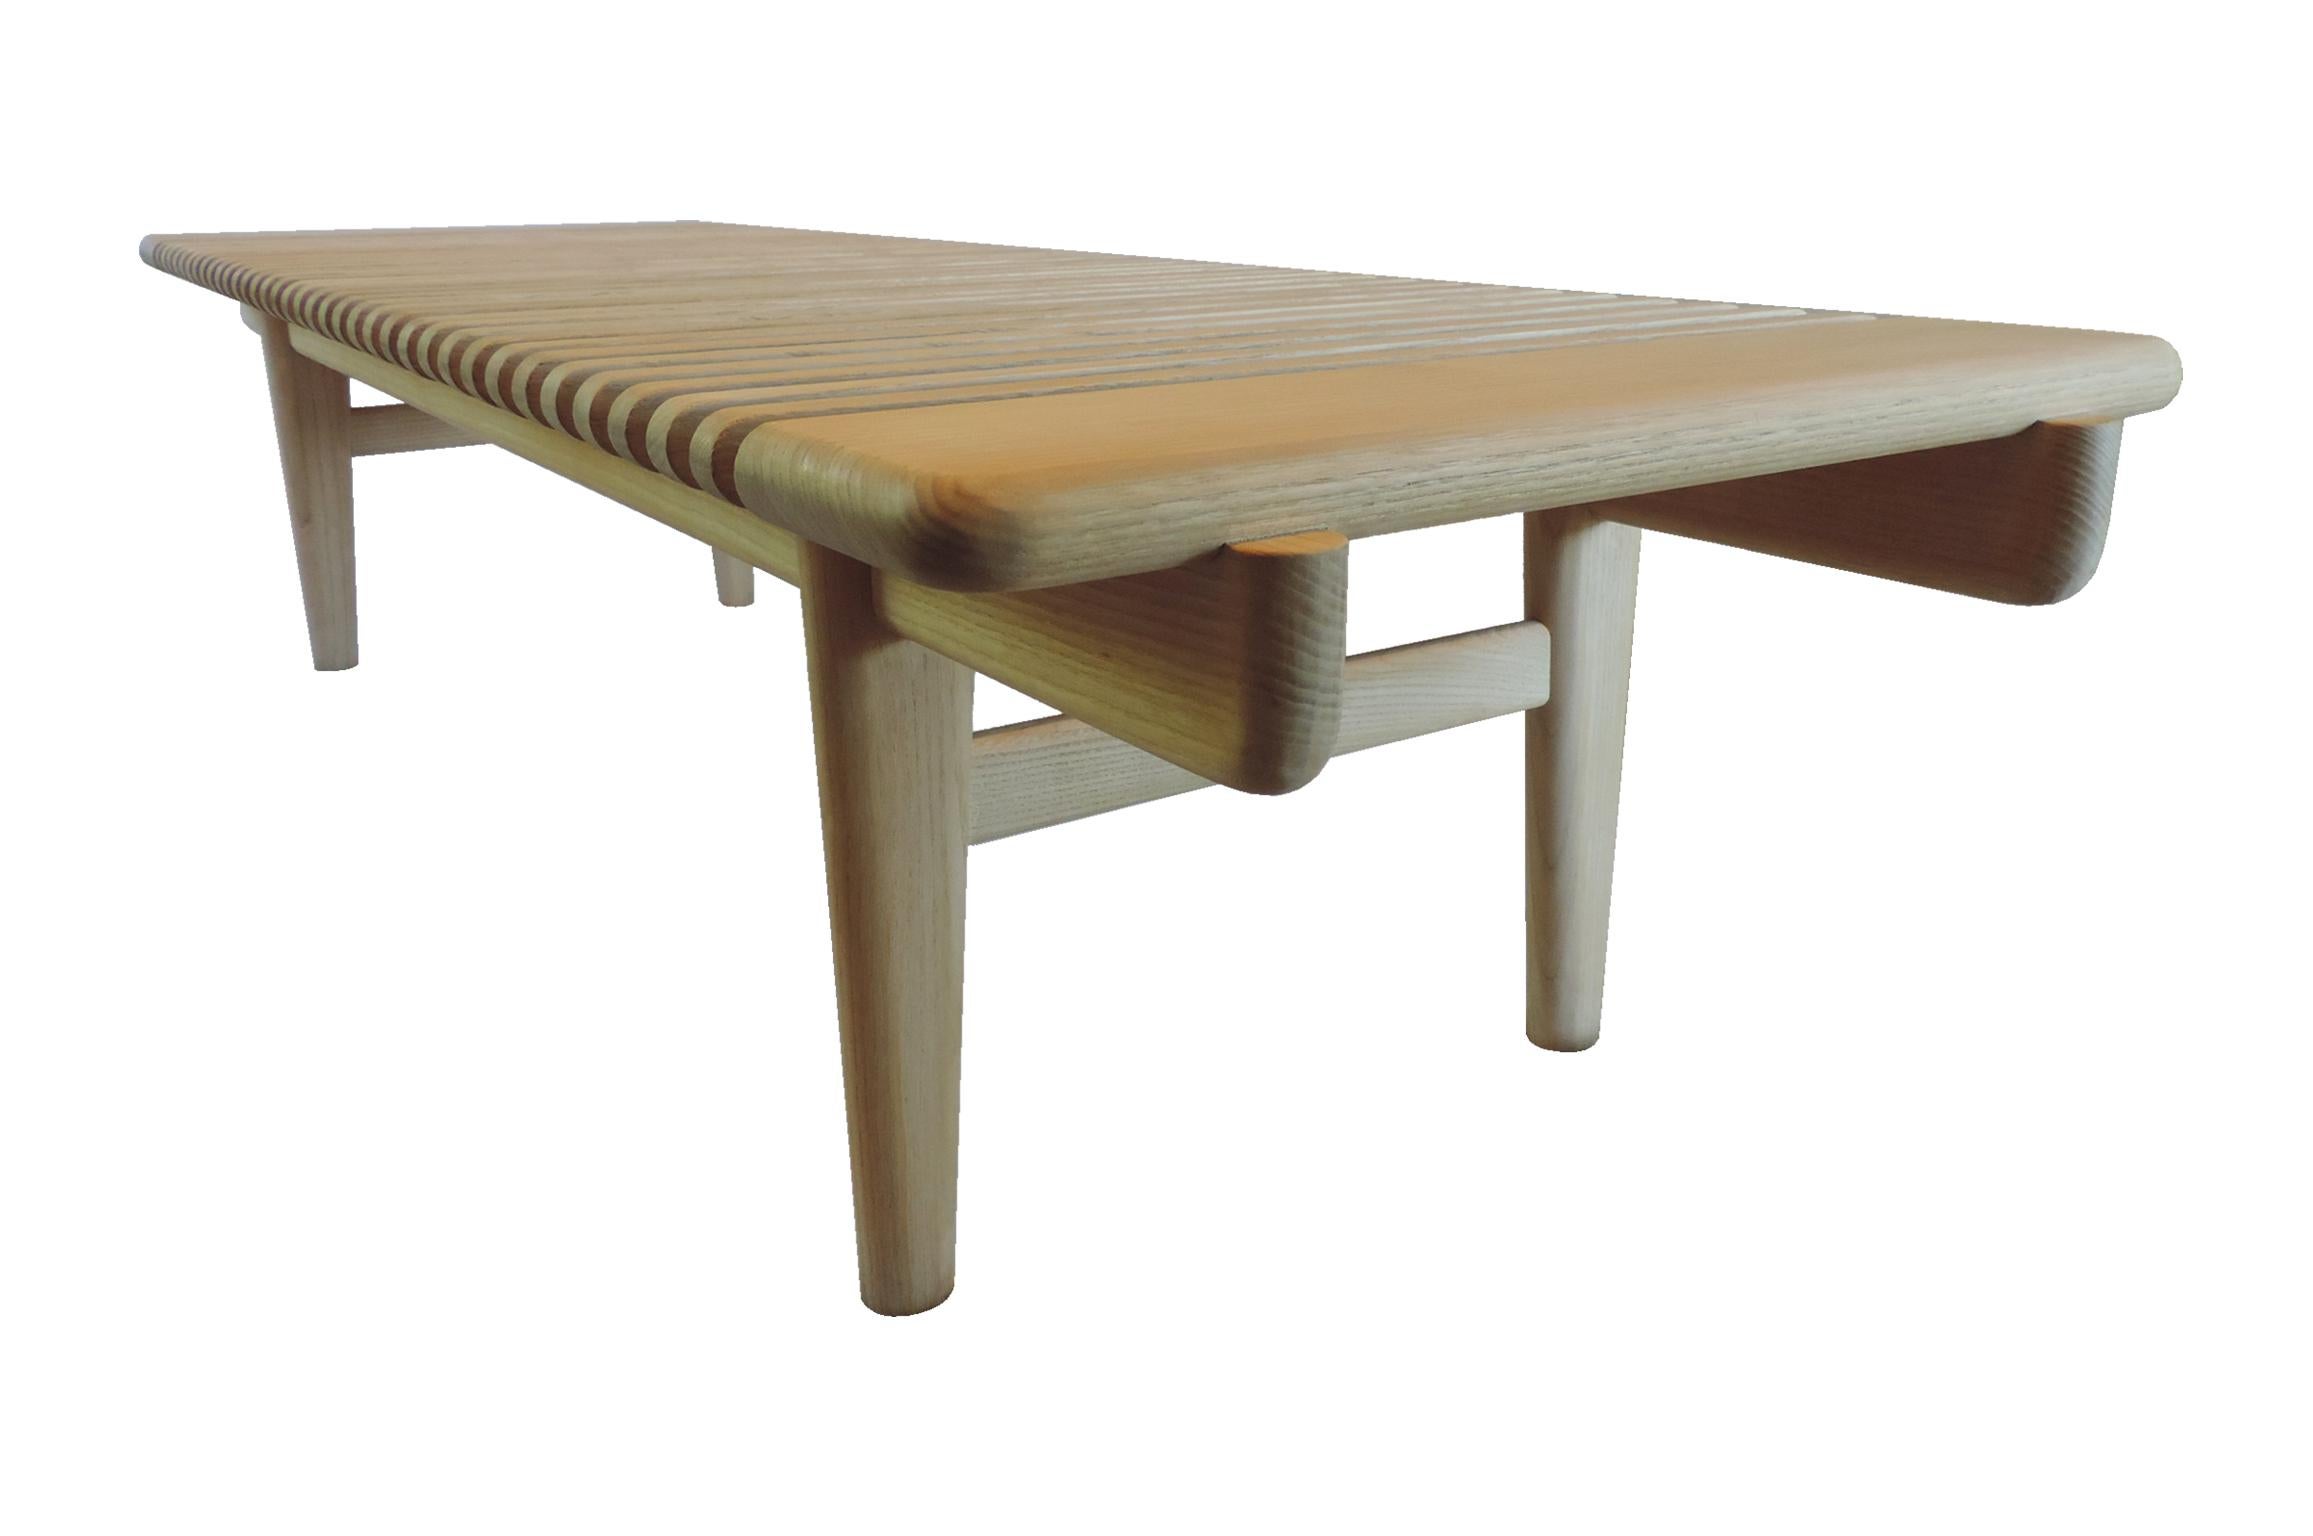 One of the most beautifully handcrafted solid timber benches ever designed.

Designed by Hans J. Wegner in 1953 for Johannes Hansen. This piece was manufactured in the 1970s and has the original manufacturer's sticker is on the underside. It was